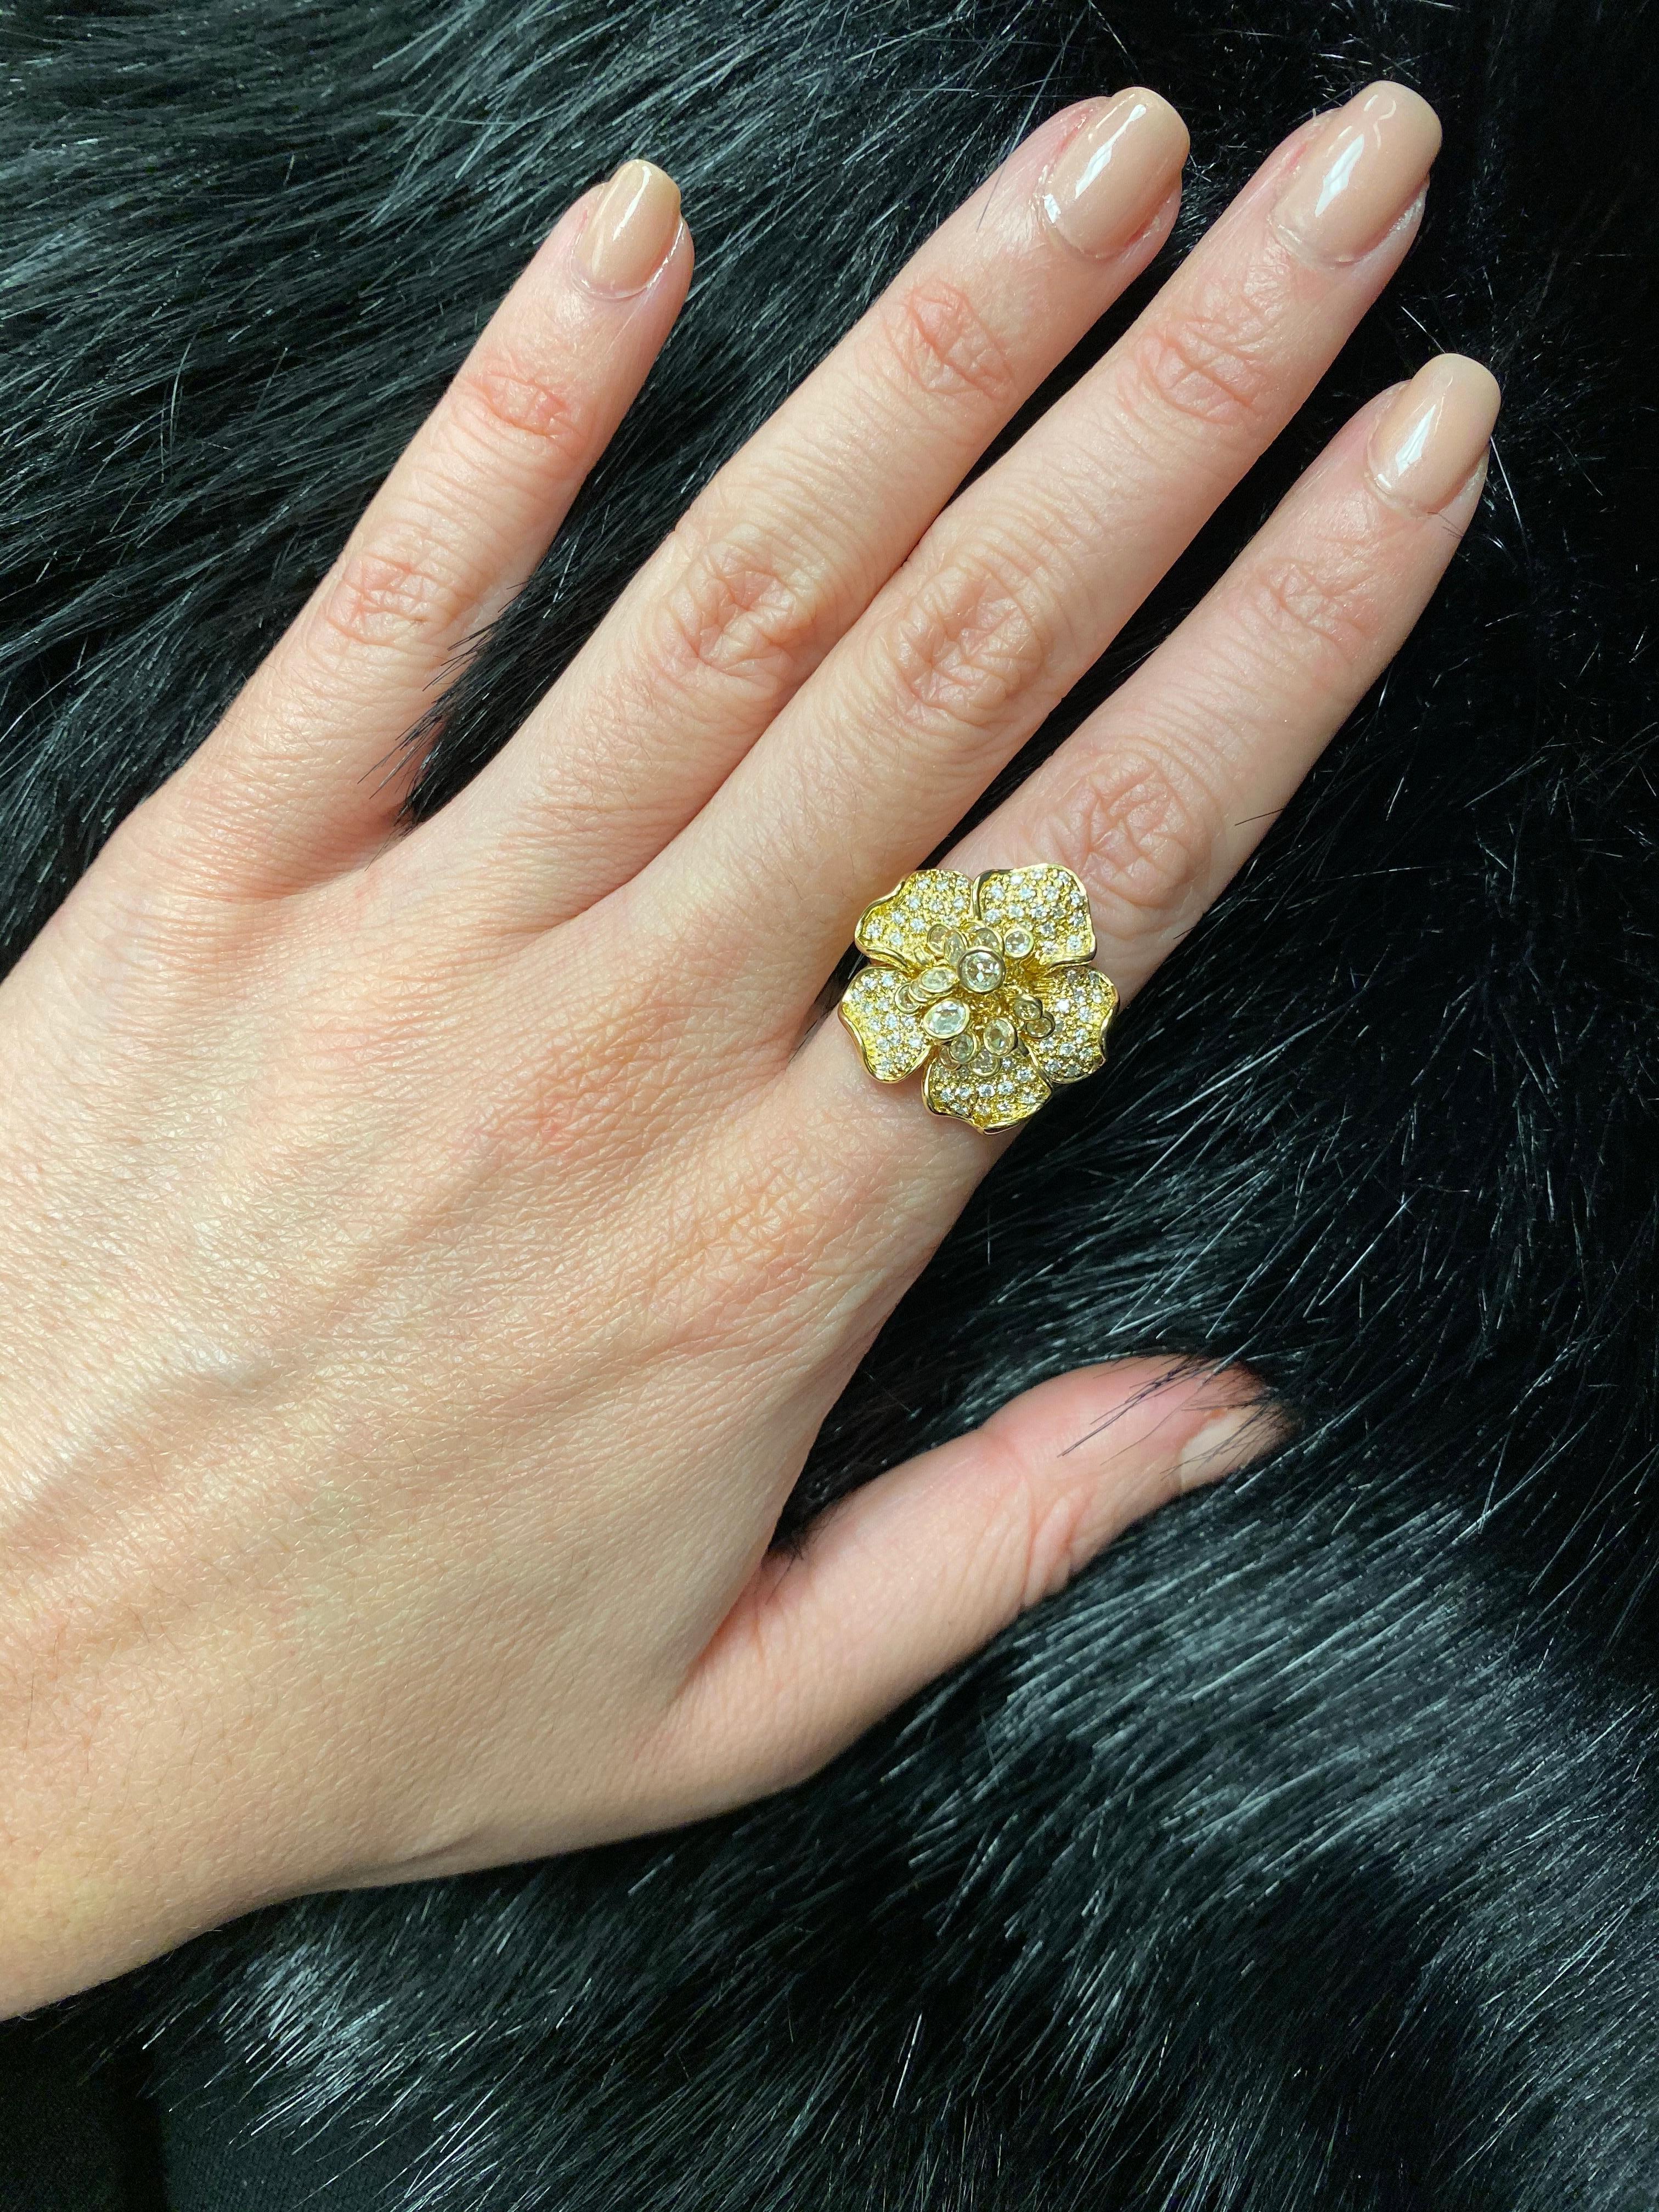 18 karat yellow gold diamond flower shaker ring. Bezel wrapped diamonds dangle and shake with the movement of your hand.  The ring is a size 6.5. There are 1.13 carats of diamonds. 